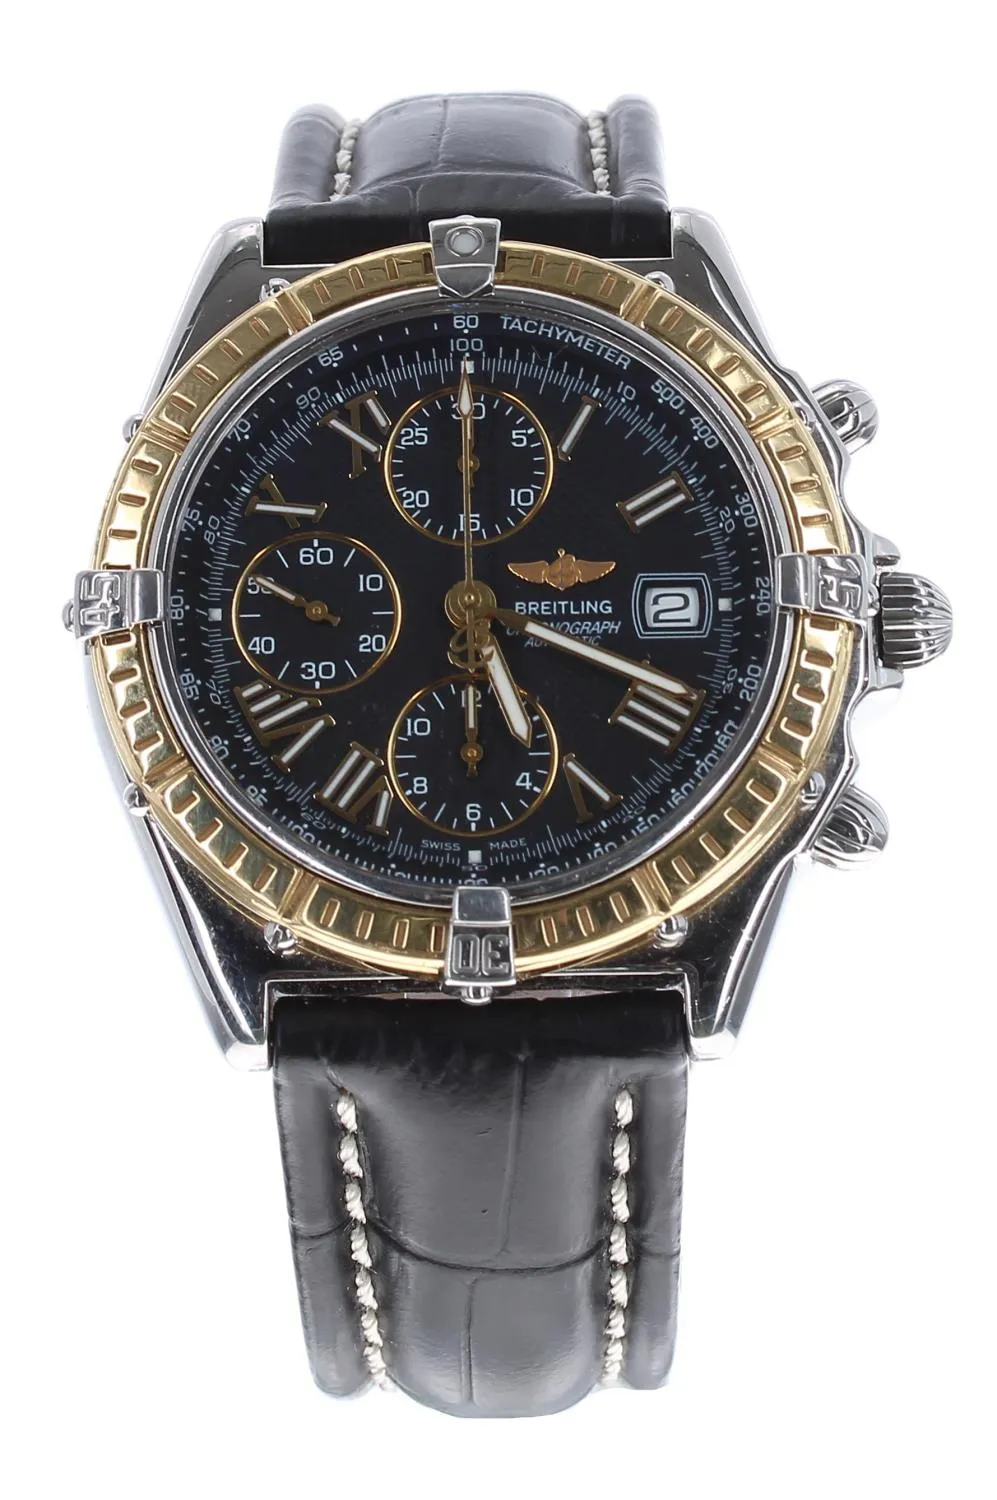 Breitling Navitimer D13055 46mm Yellow gold and stainless steel Black